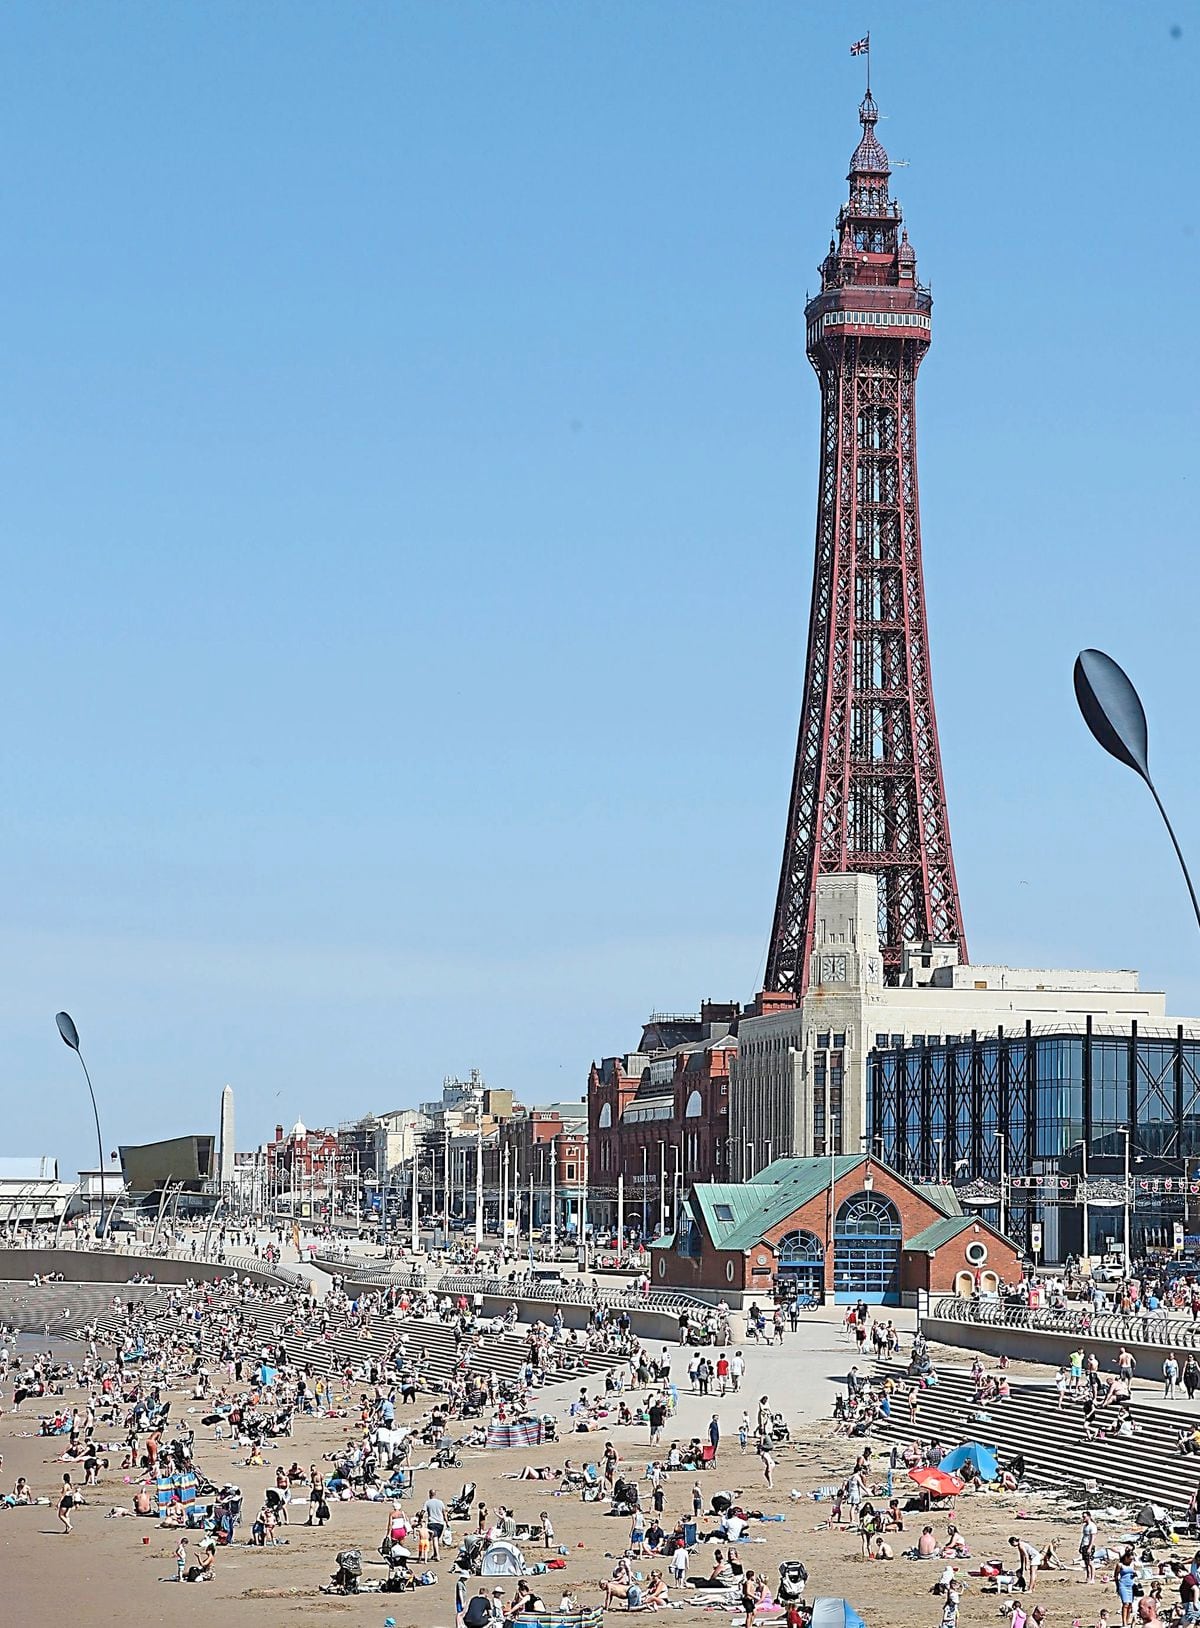 People enjoy the hot weather at Blackpool beach